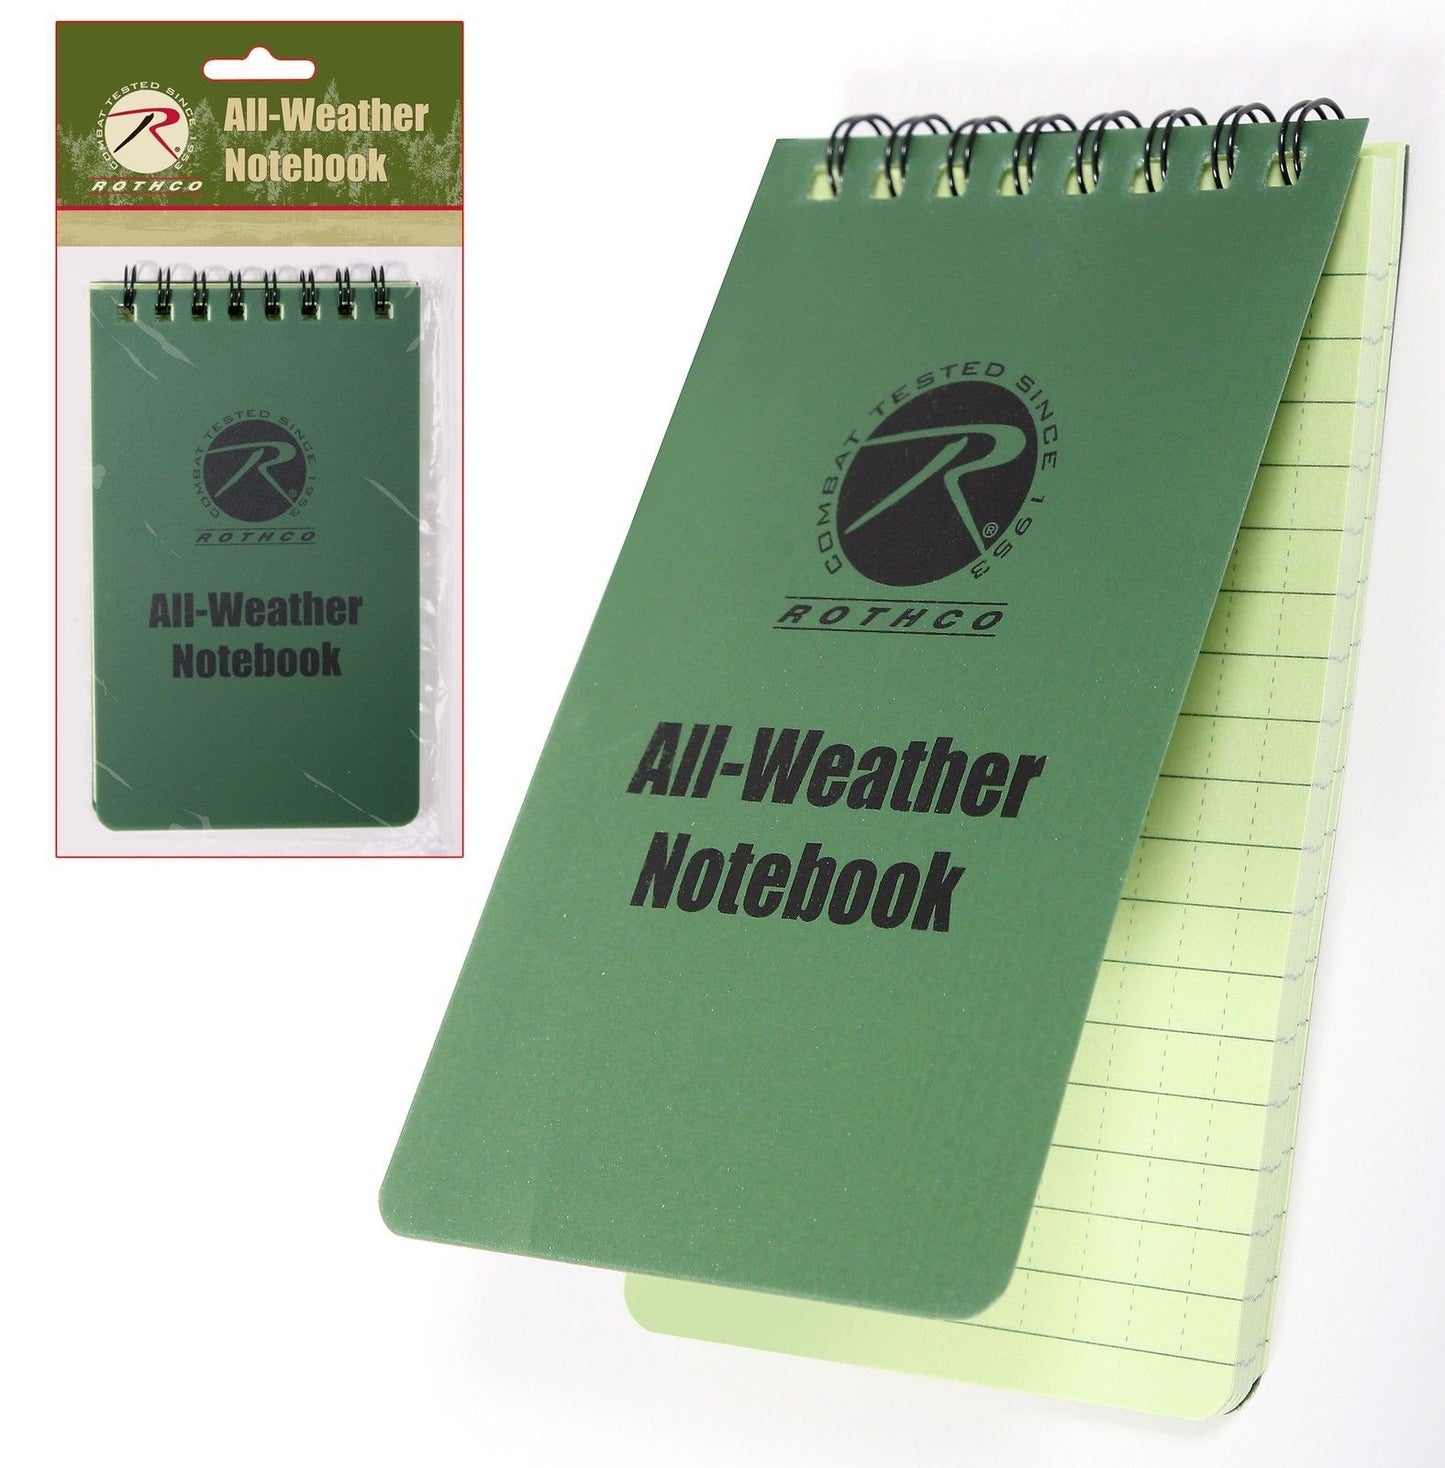 All-Weather Notebook - 48 Sheets Waterproof Paper Note Book Outdoor